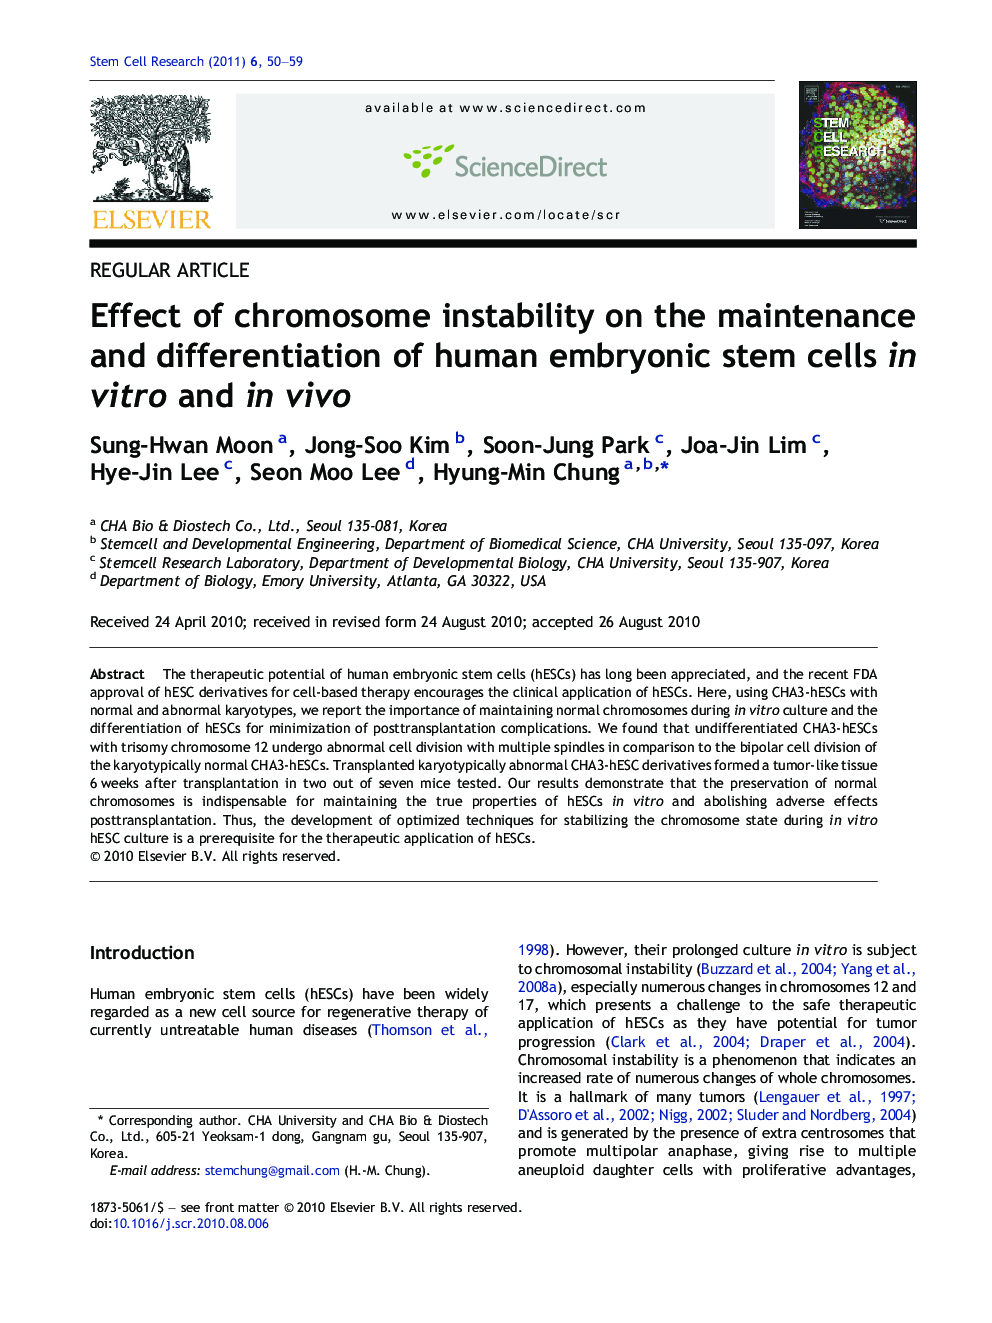 Effect of chromosome instability on the maintenance and differentiation of human embryonic stem cells in vitro and in vivo